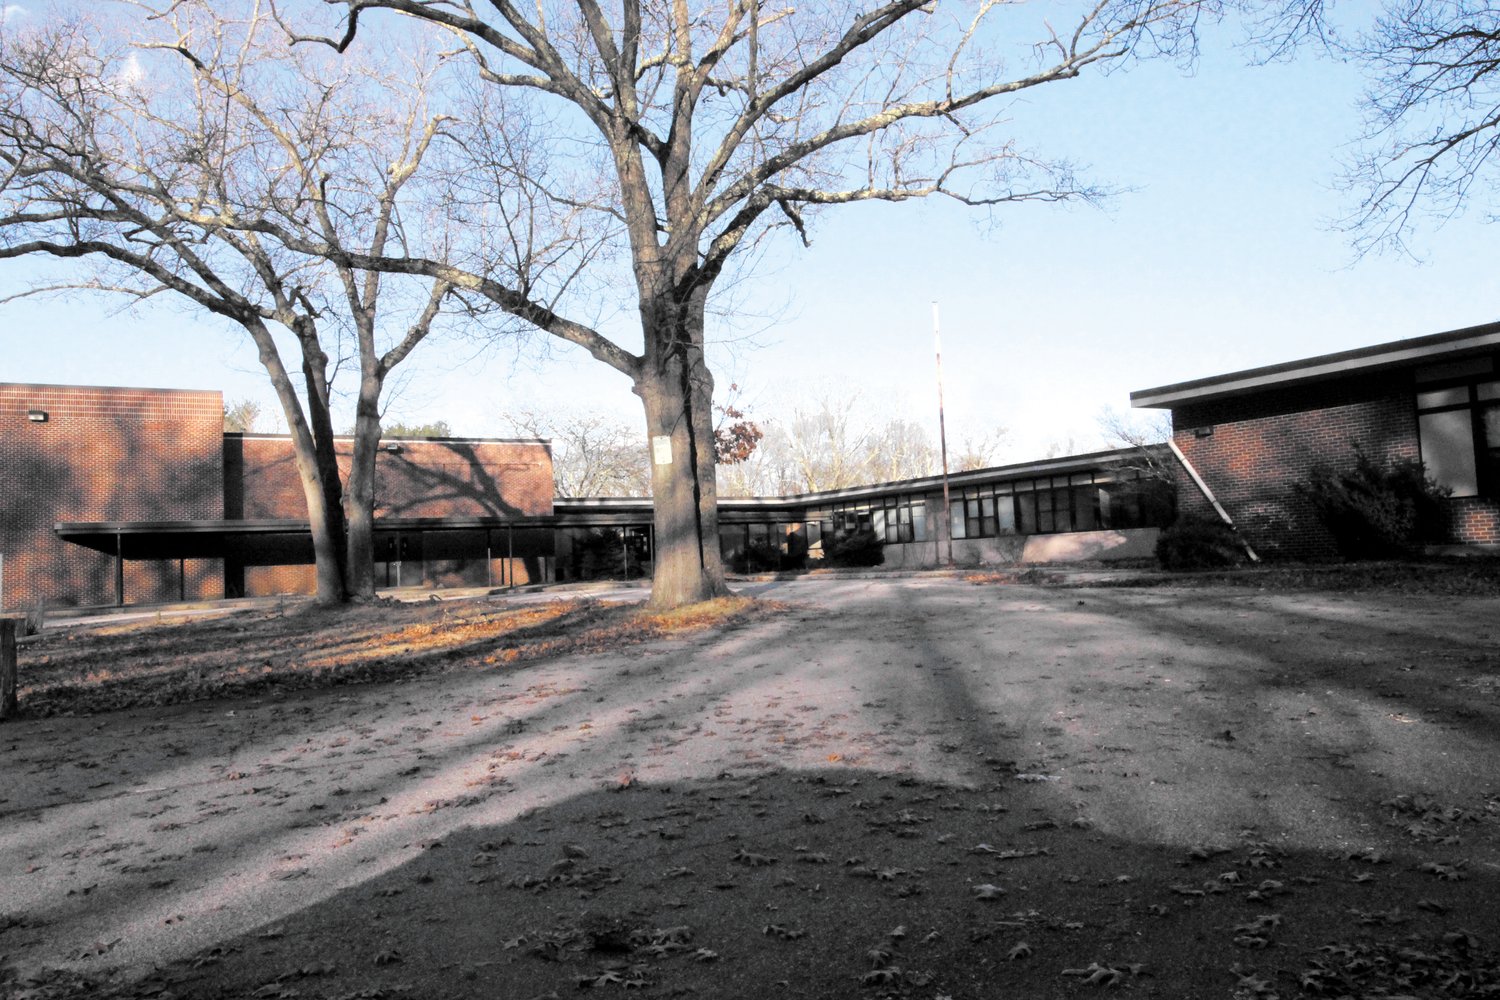 FOR SALE: The city is seeking bids for the former John Wickes School on Child Lane, which is on 10.5 acres. In its request for proposals, the city offered a possible residential development of 42 single-family homes on the site.